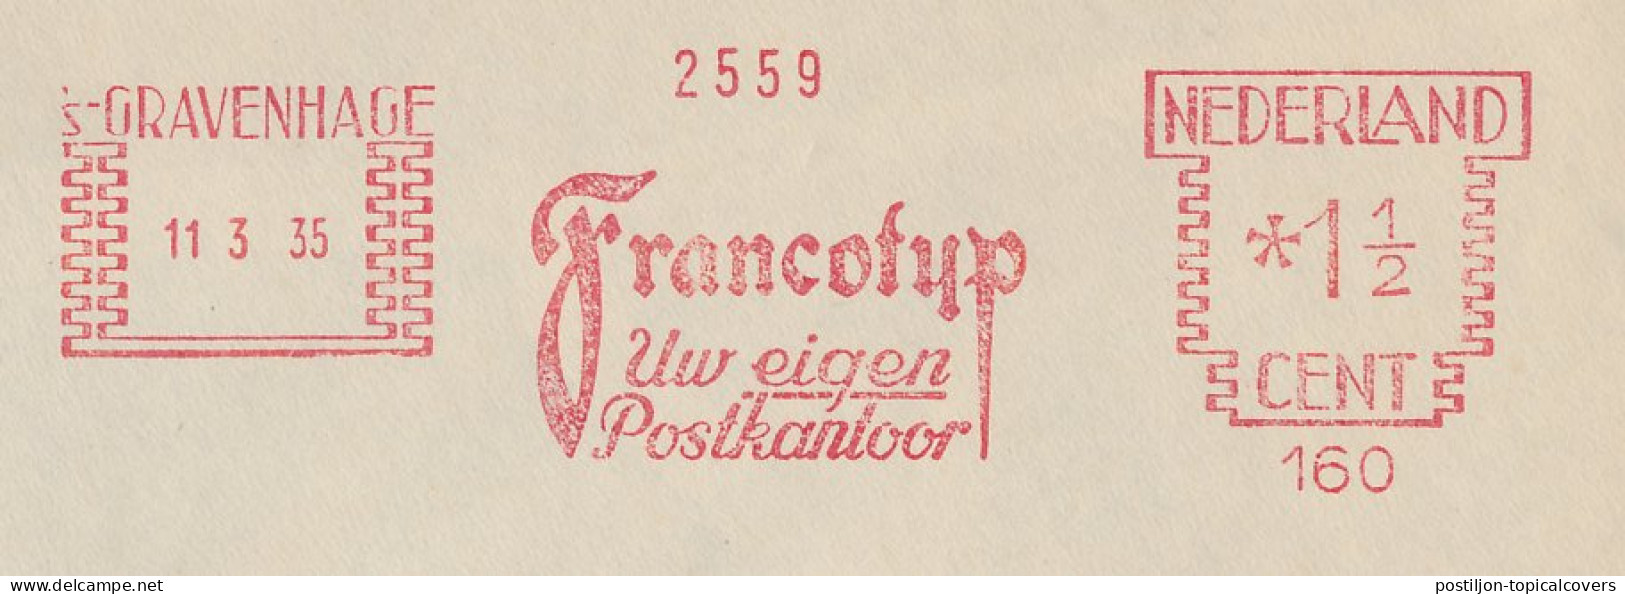 Meter Cover Netherlands 1935 Francotyp - The Hague - Machine Labels [ATM]